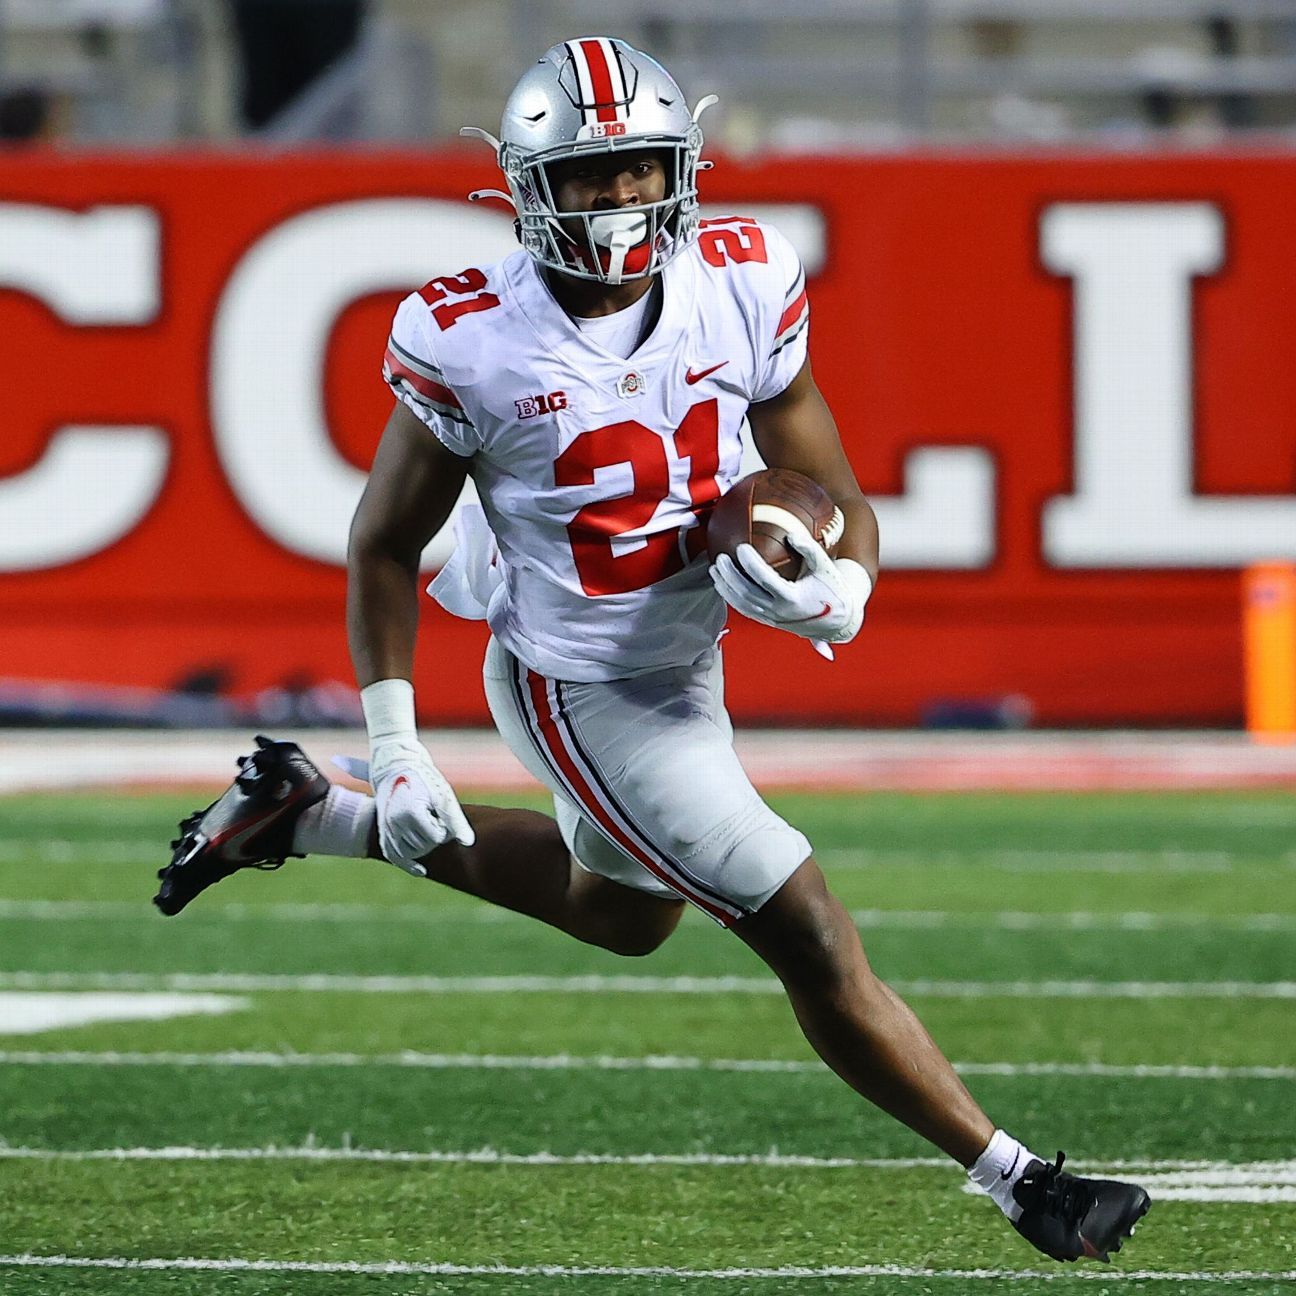 Sources: Ohio State RB Pryor injured, out for '22